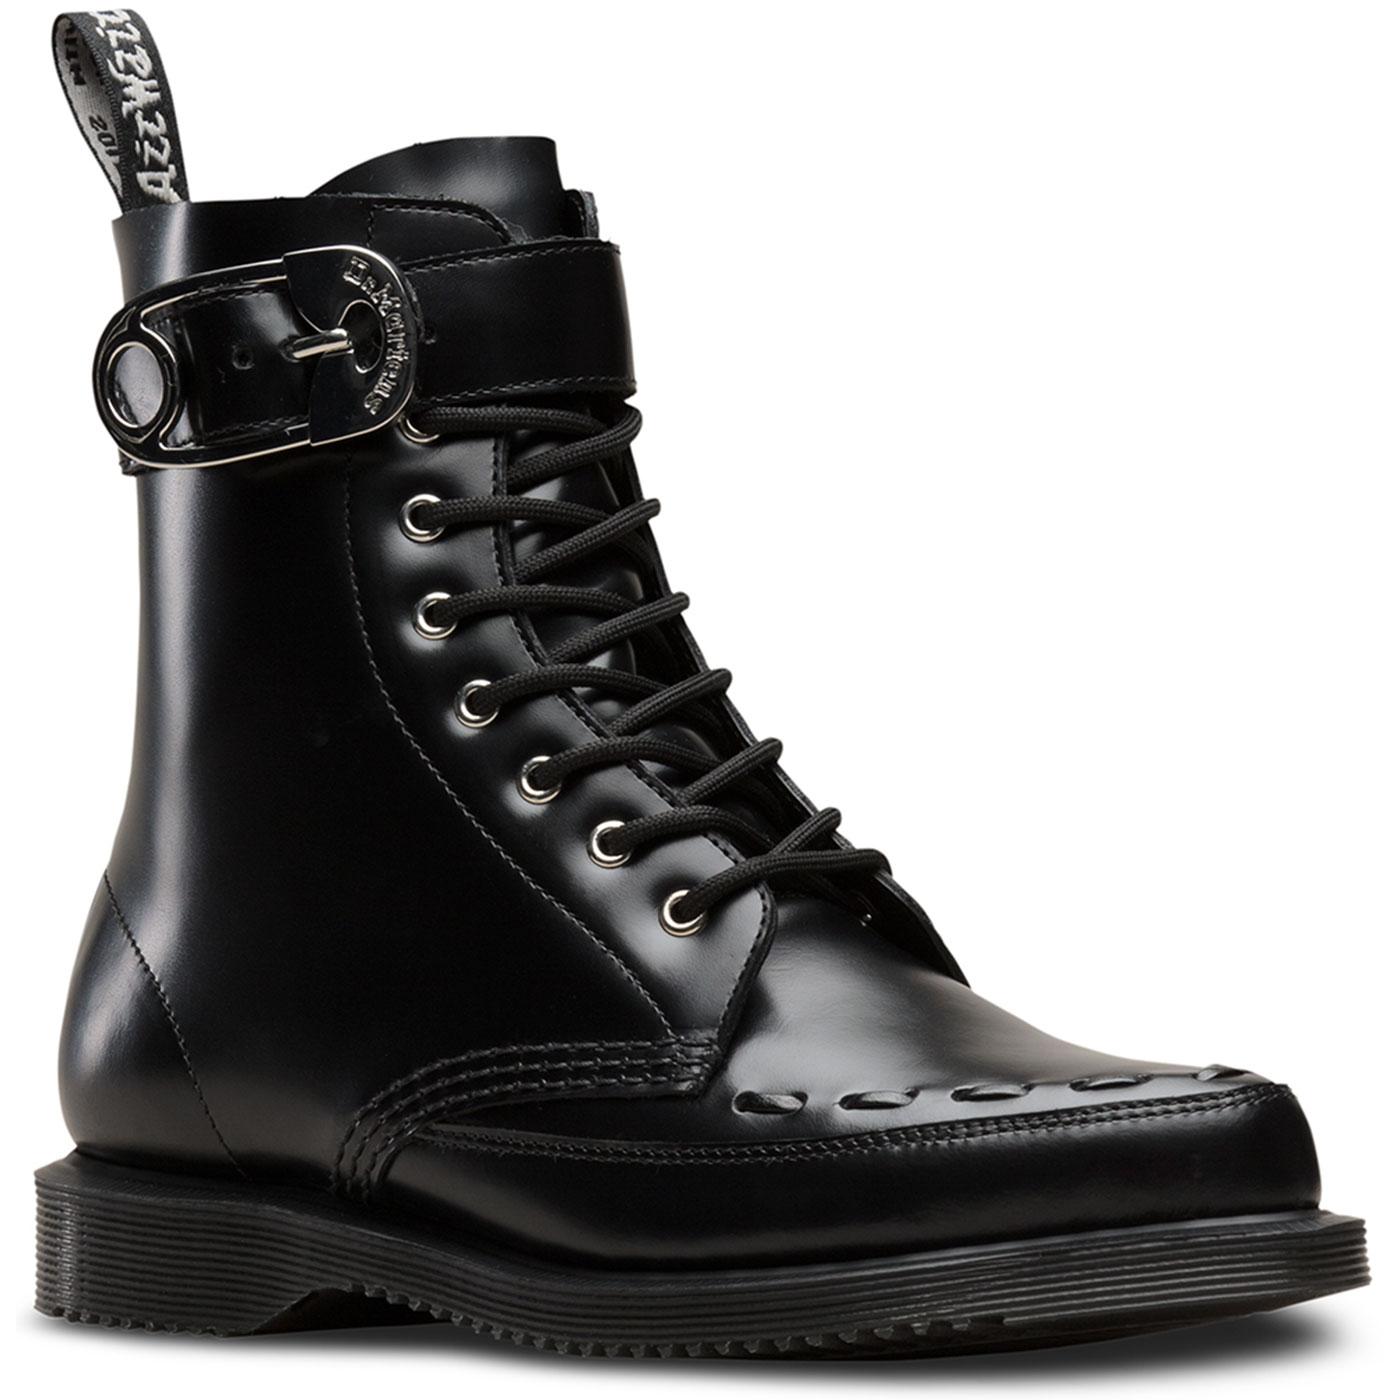 DR MARTENS Women's Retro 70s Geordin Safety Pin Boots